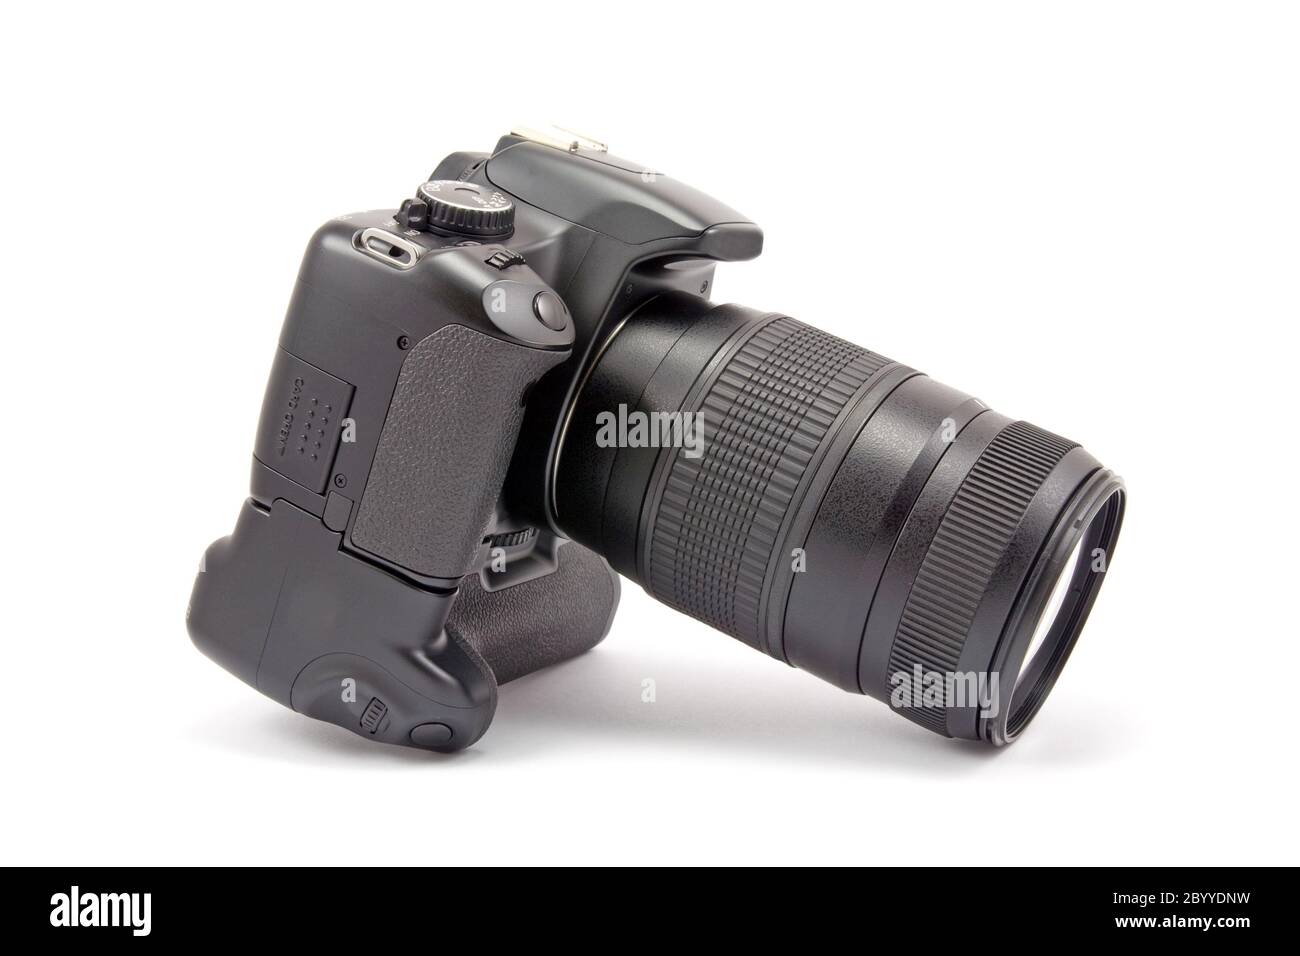 camera with battery grip and lens Stock Photo